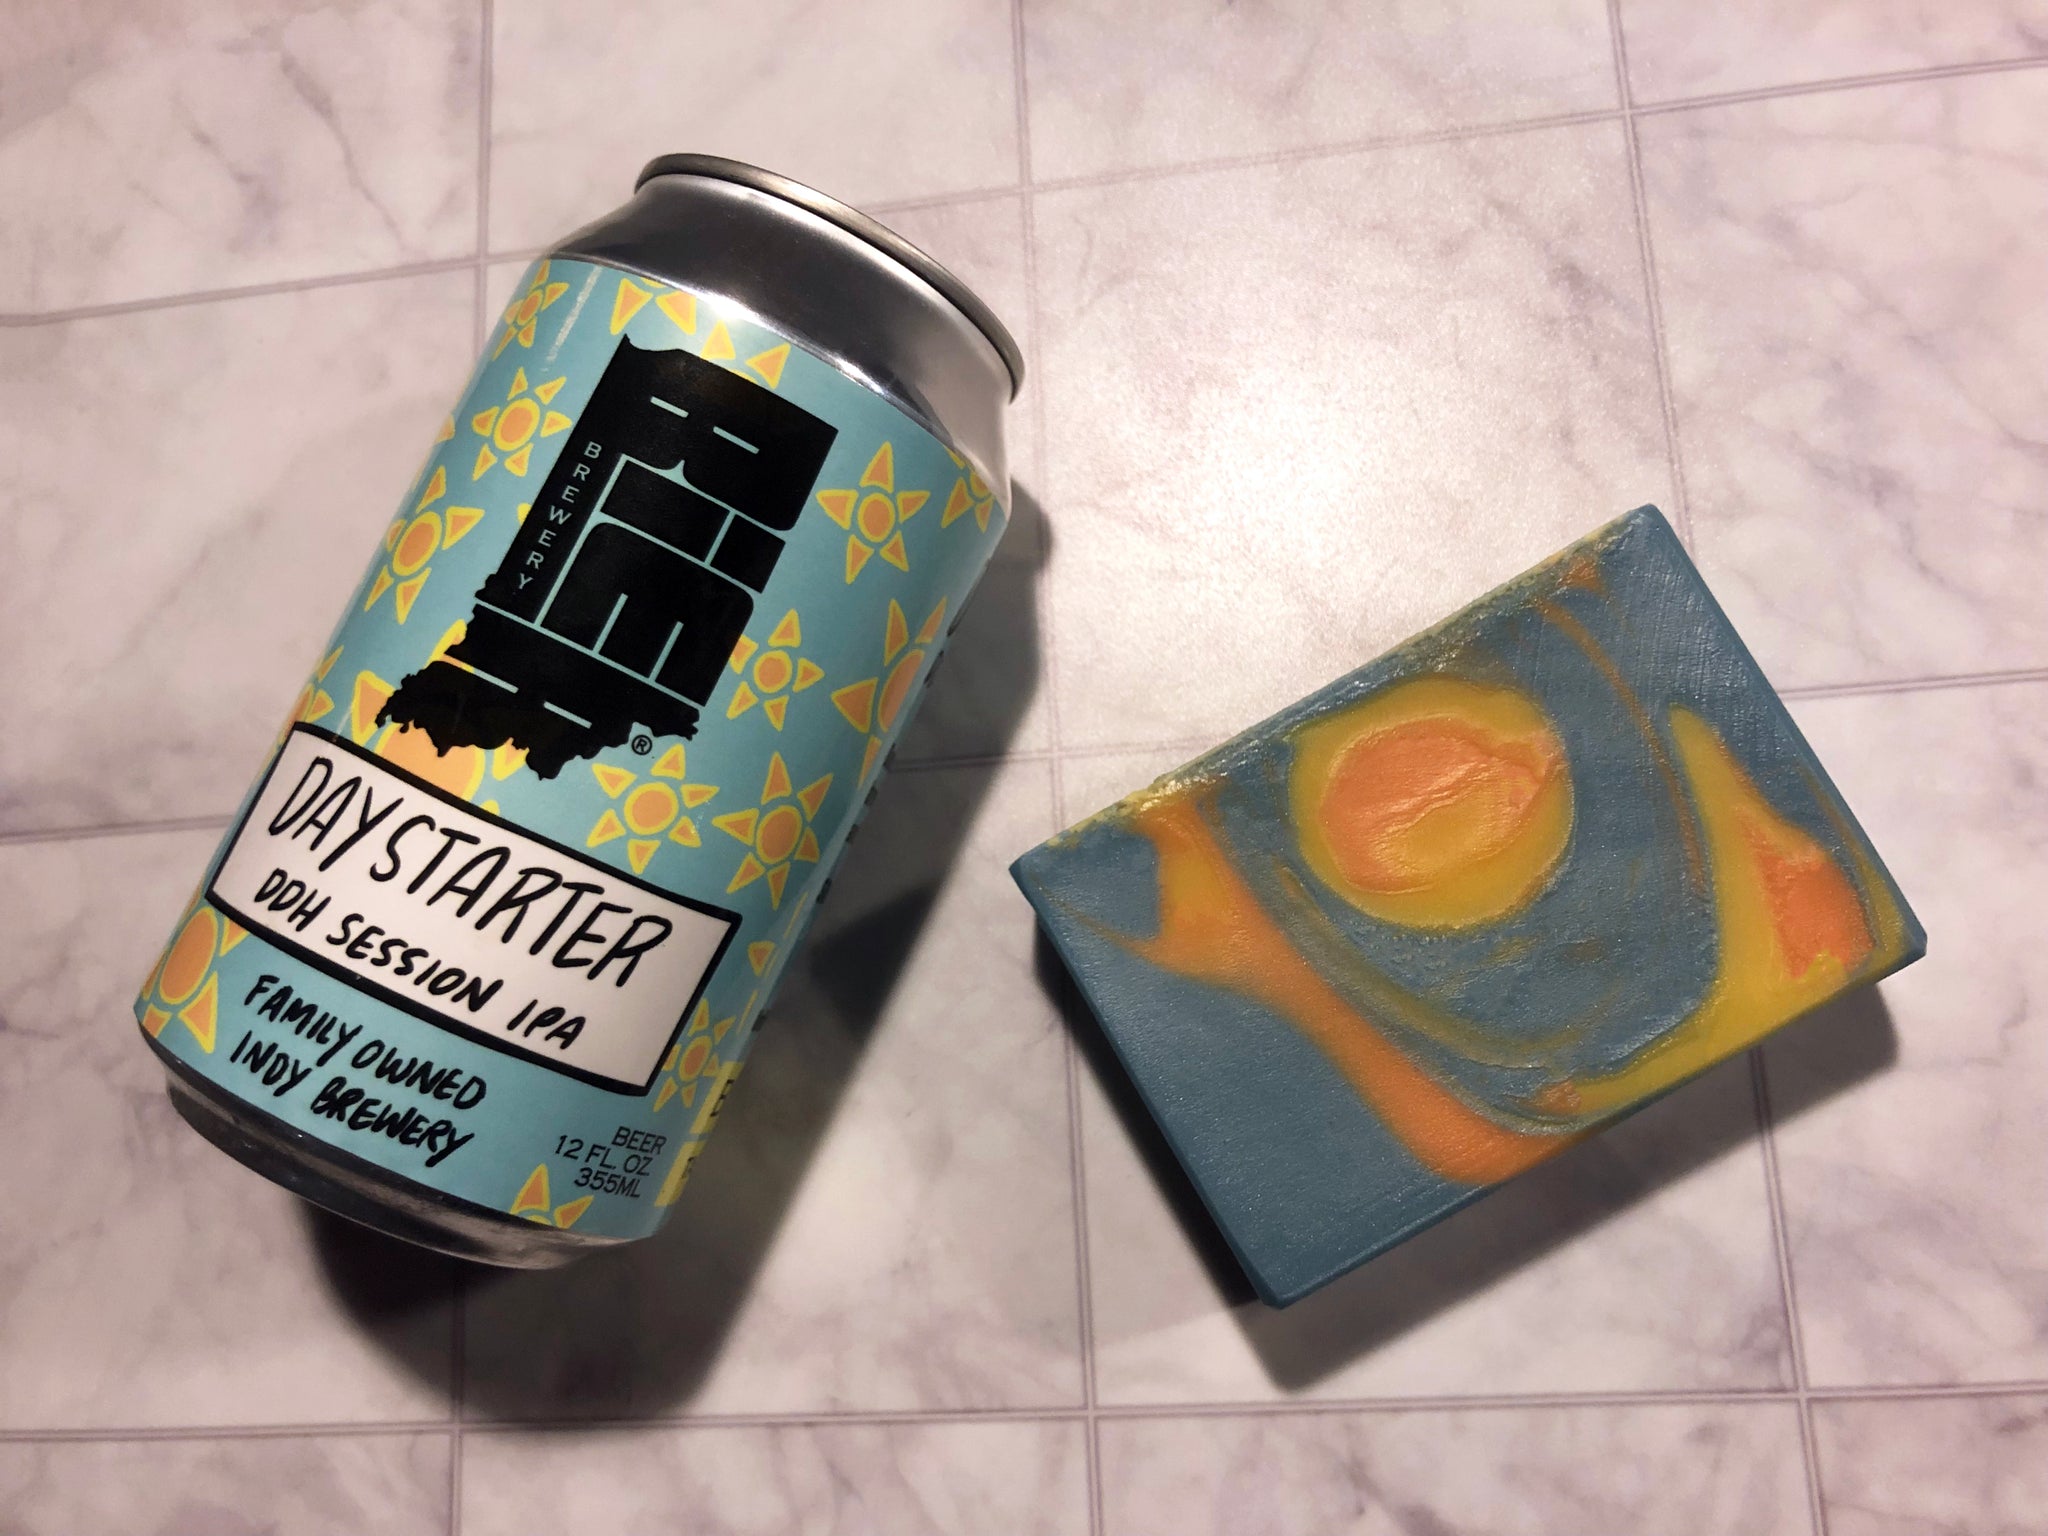 indiana beer soap made with daystarter ddh session ipa from bier brewery Indianapolis brewery light blue yellow and orange swirl beer soap for sale by SpunkNDisorderly beer soap 